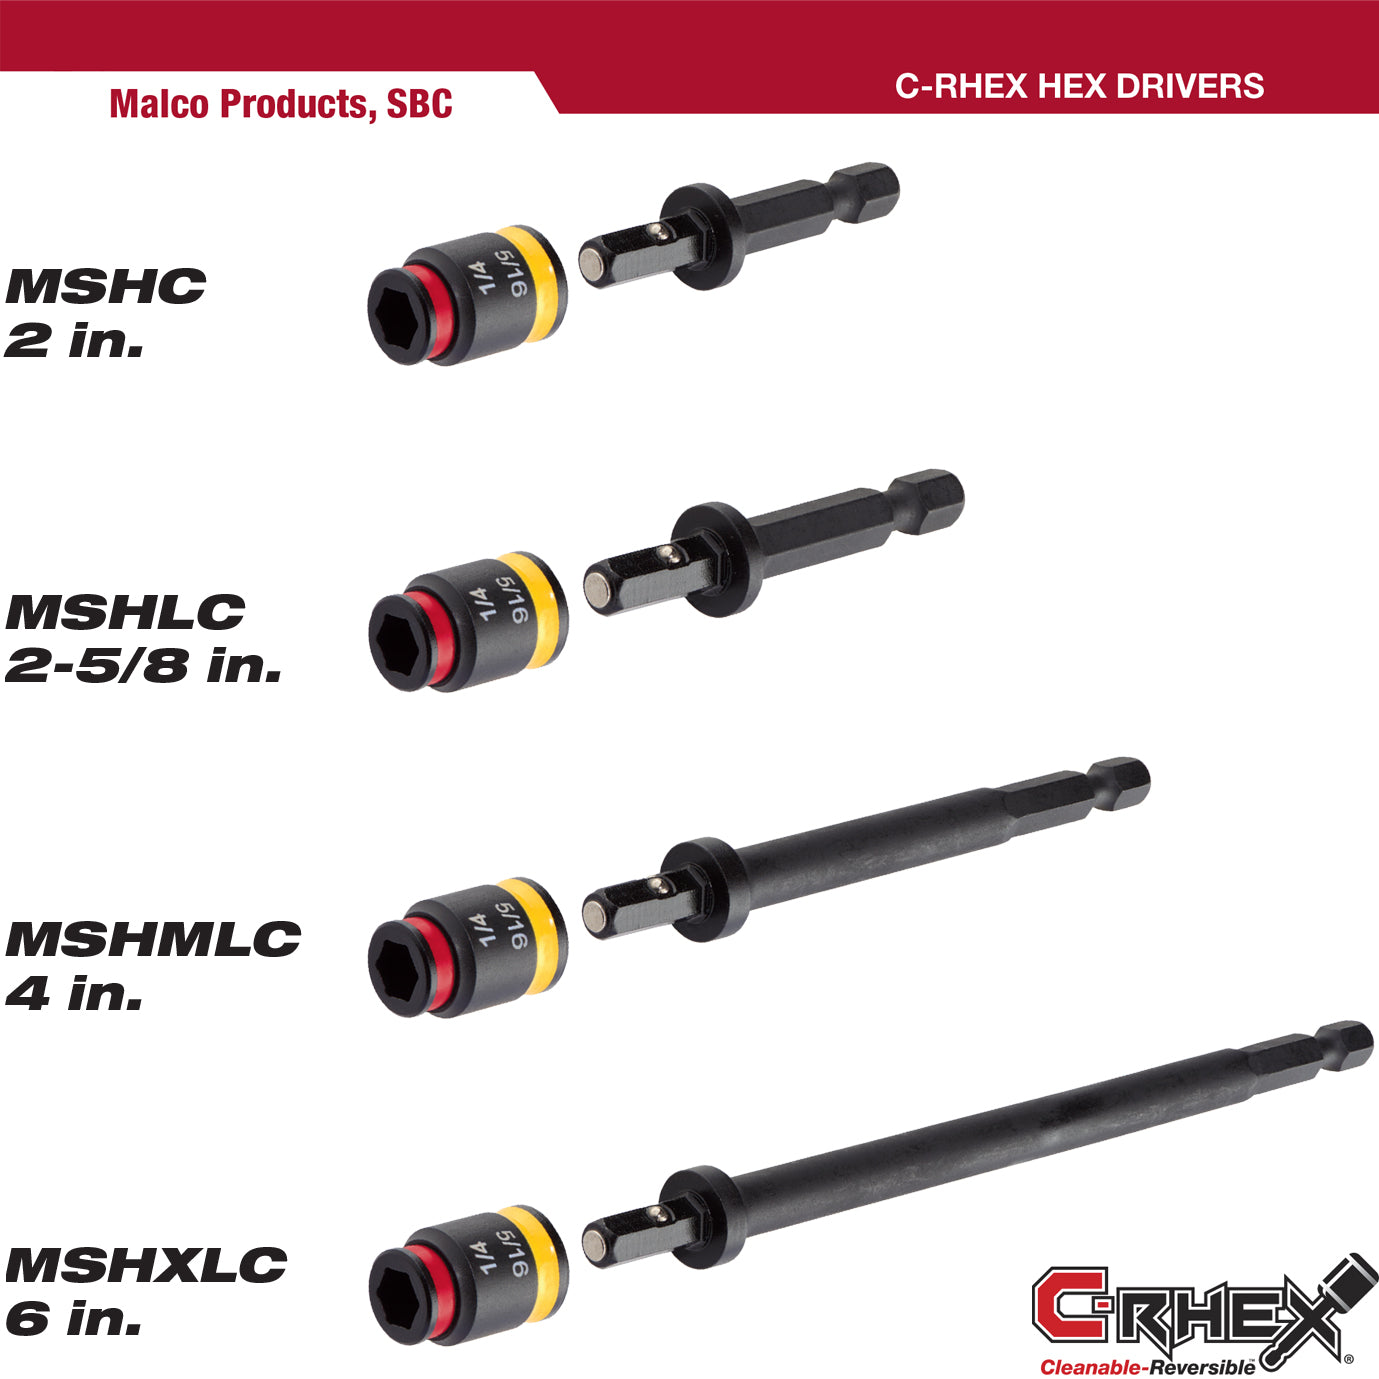 MSHMLC - C-RHEX Cleanable, Reversible Magnetic Hex Drivers, 1/4" and 5/16", 4" Length